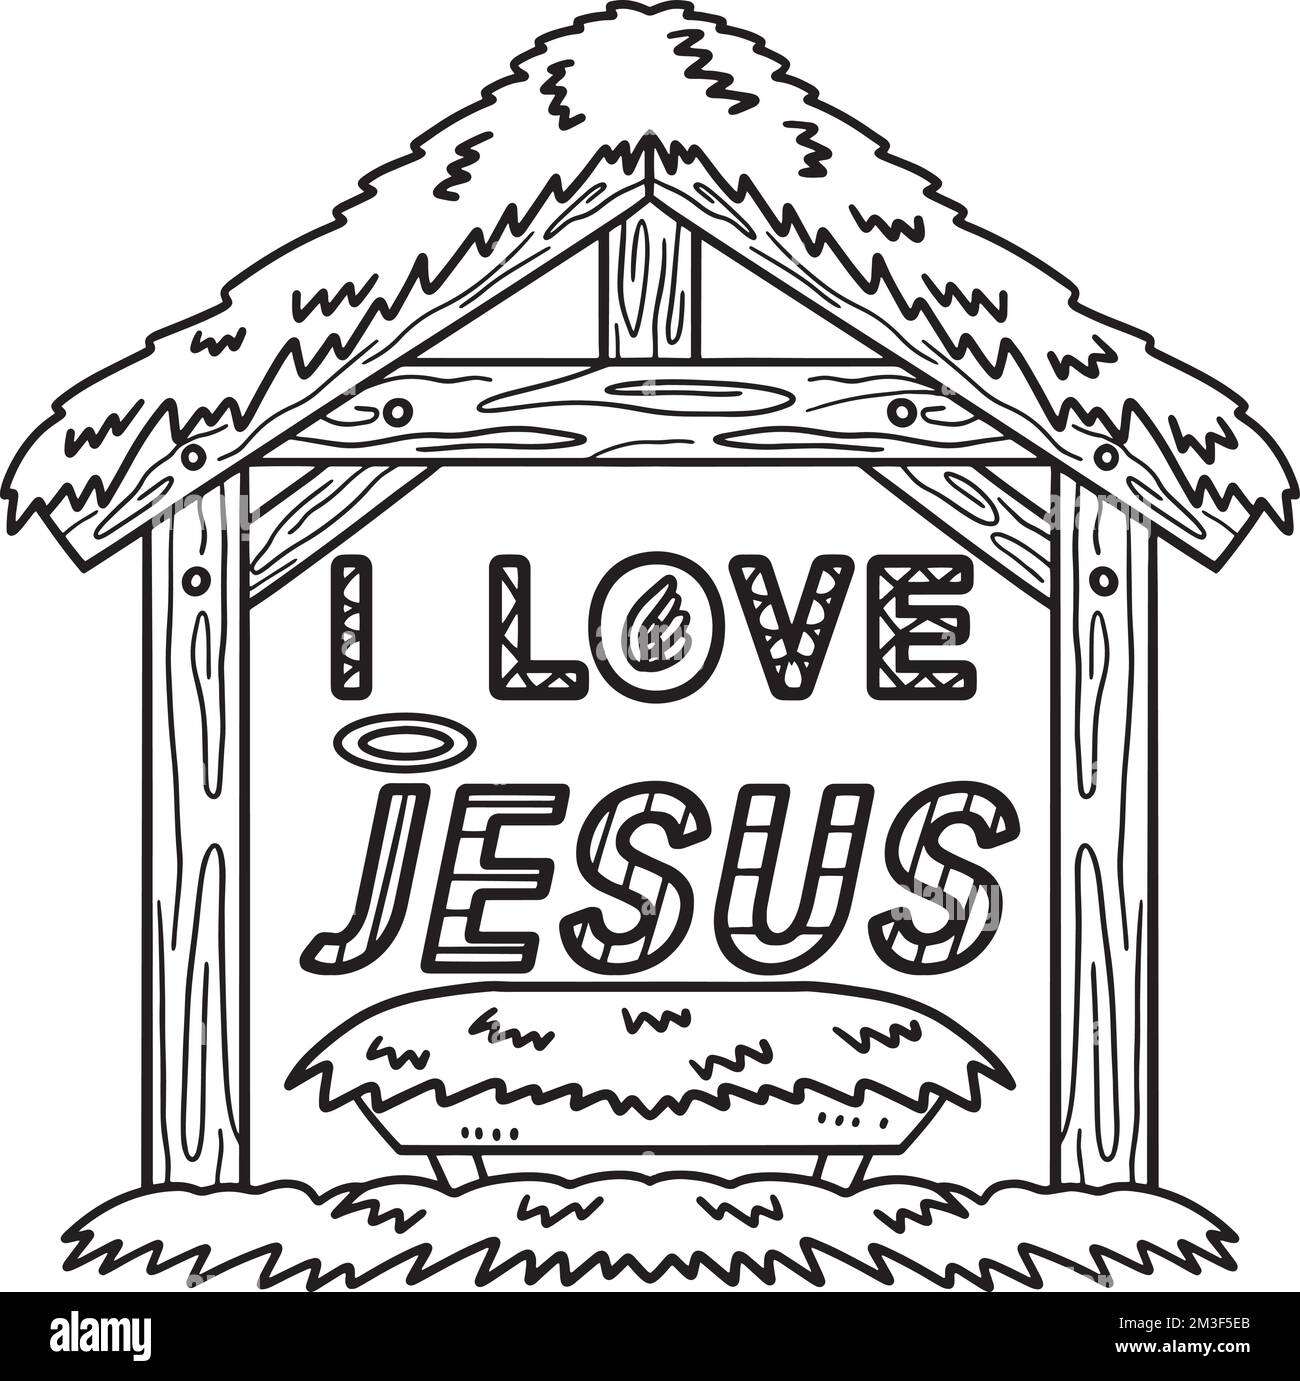 Christian I Love Jesus Isolated Coloring Page Stock Vector